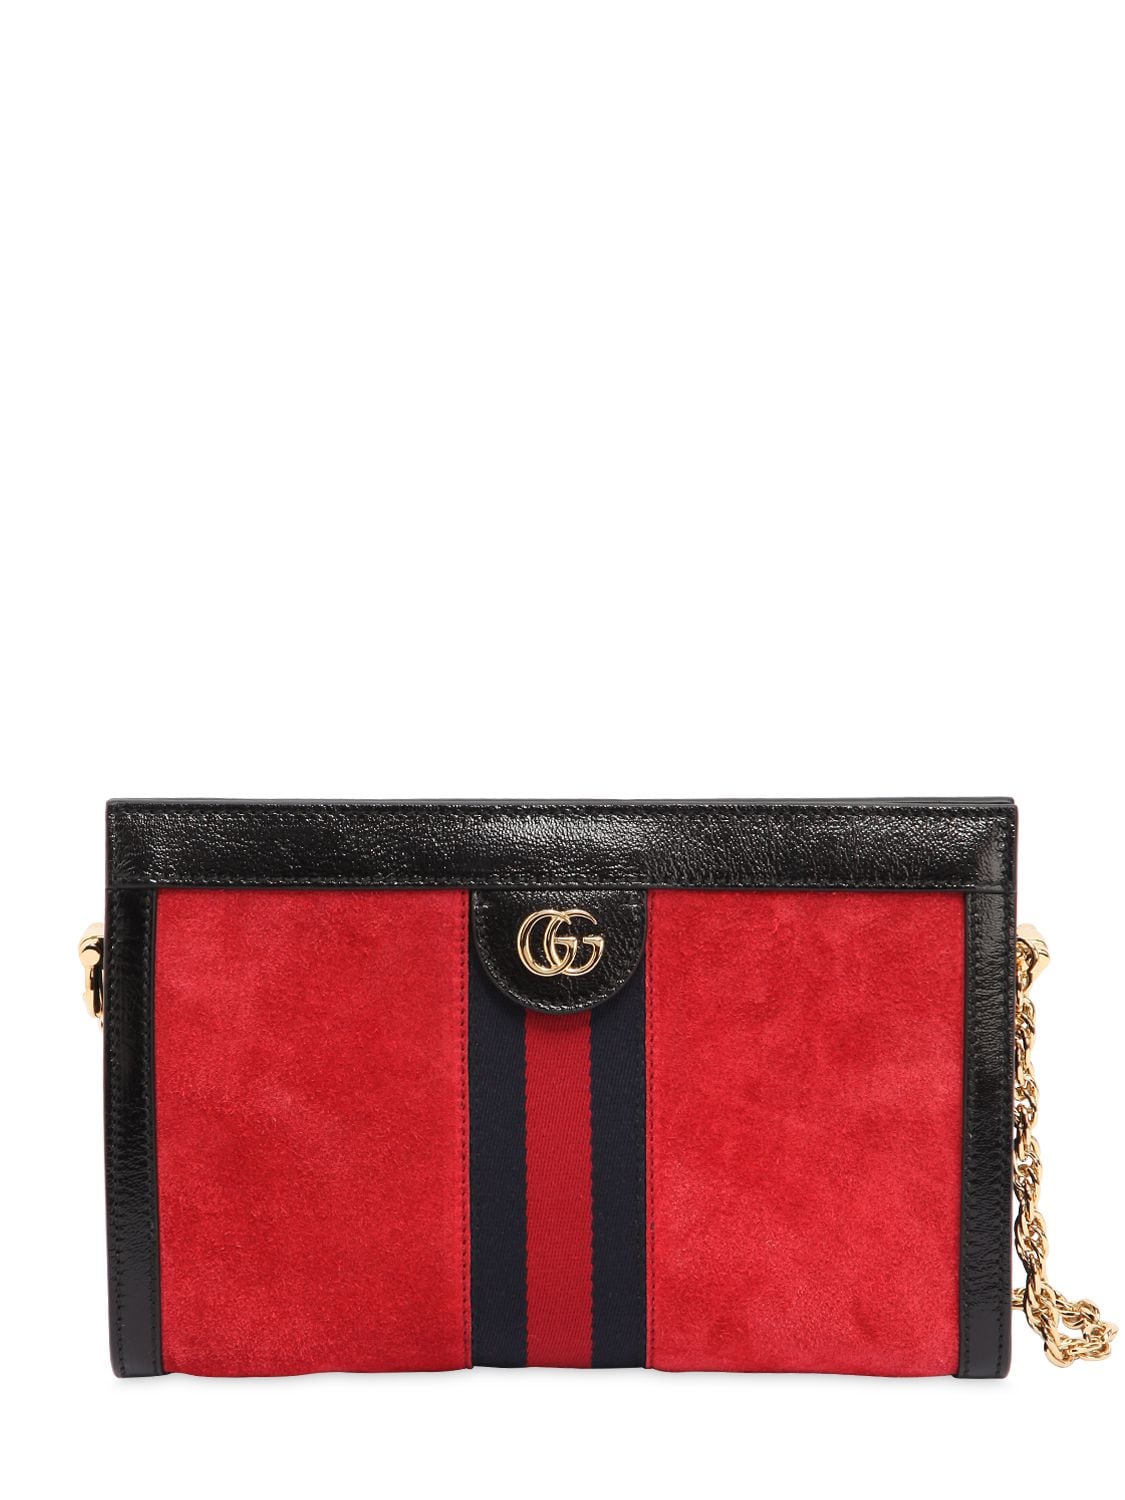 GUCCI OPHIDIA SUEDE SHOULDER BAG,67IIJS101-ODY3MA2